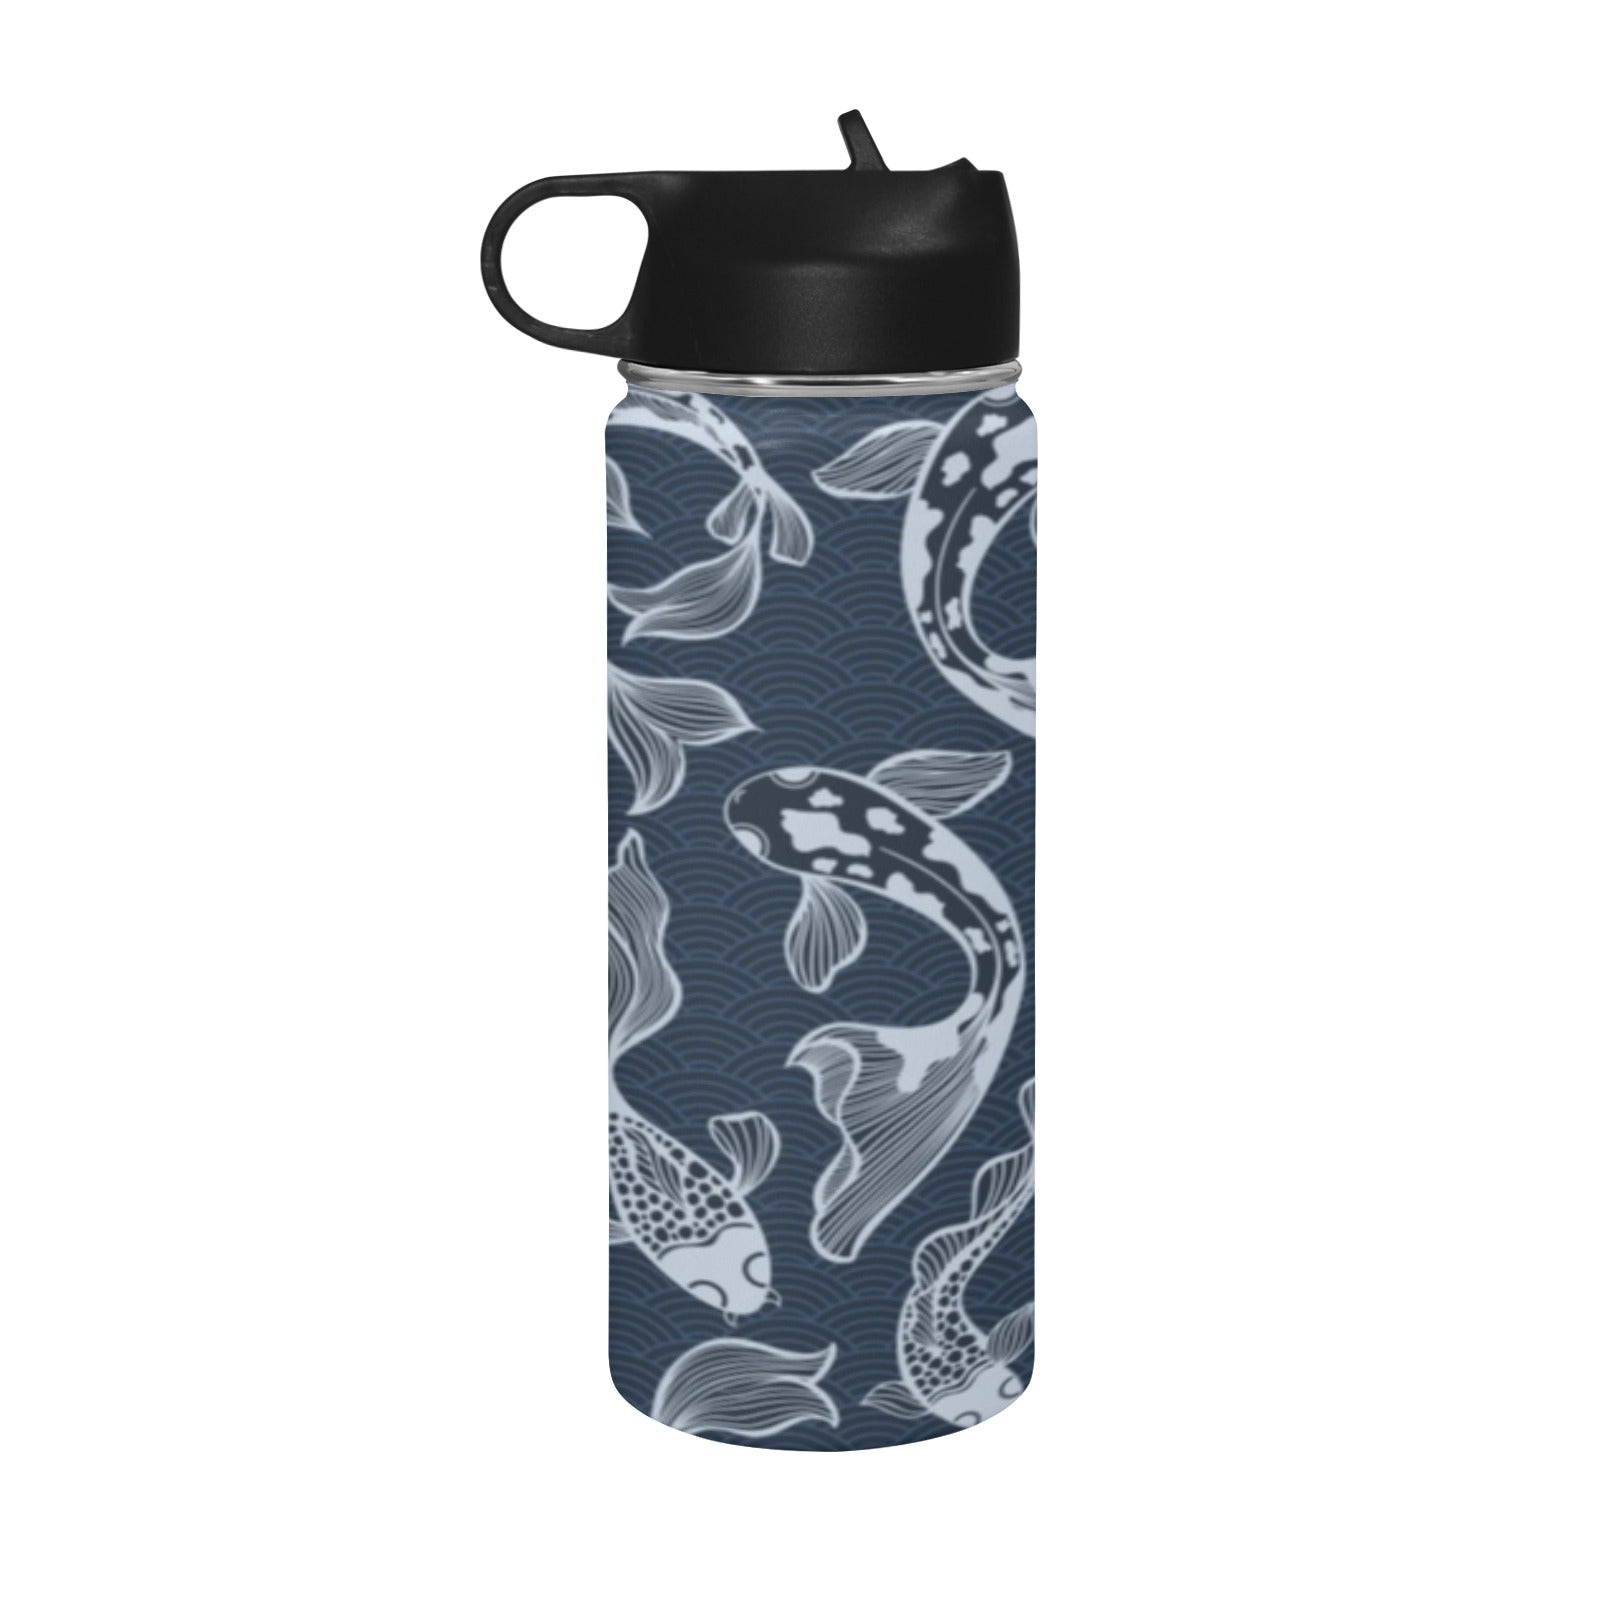 Blue Fish Insulated Water Bottle with Straw Lid (18 oz) Insulated Water Bottle with Straw Lid